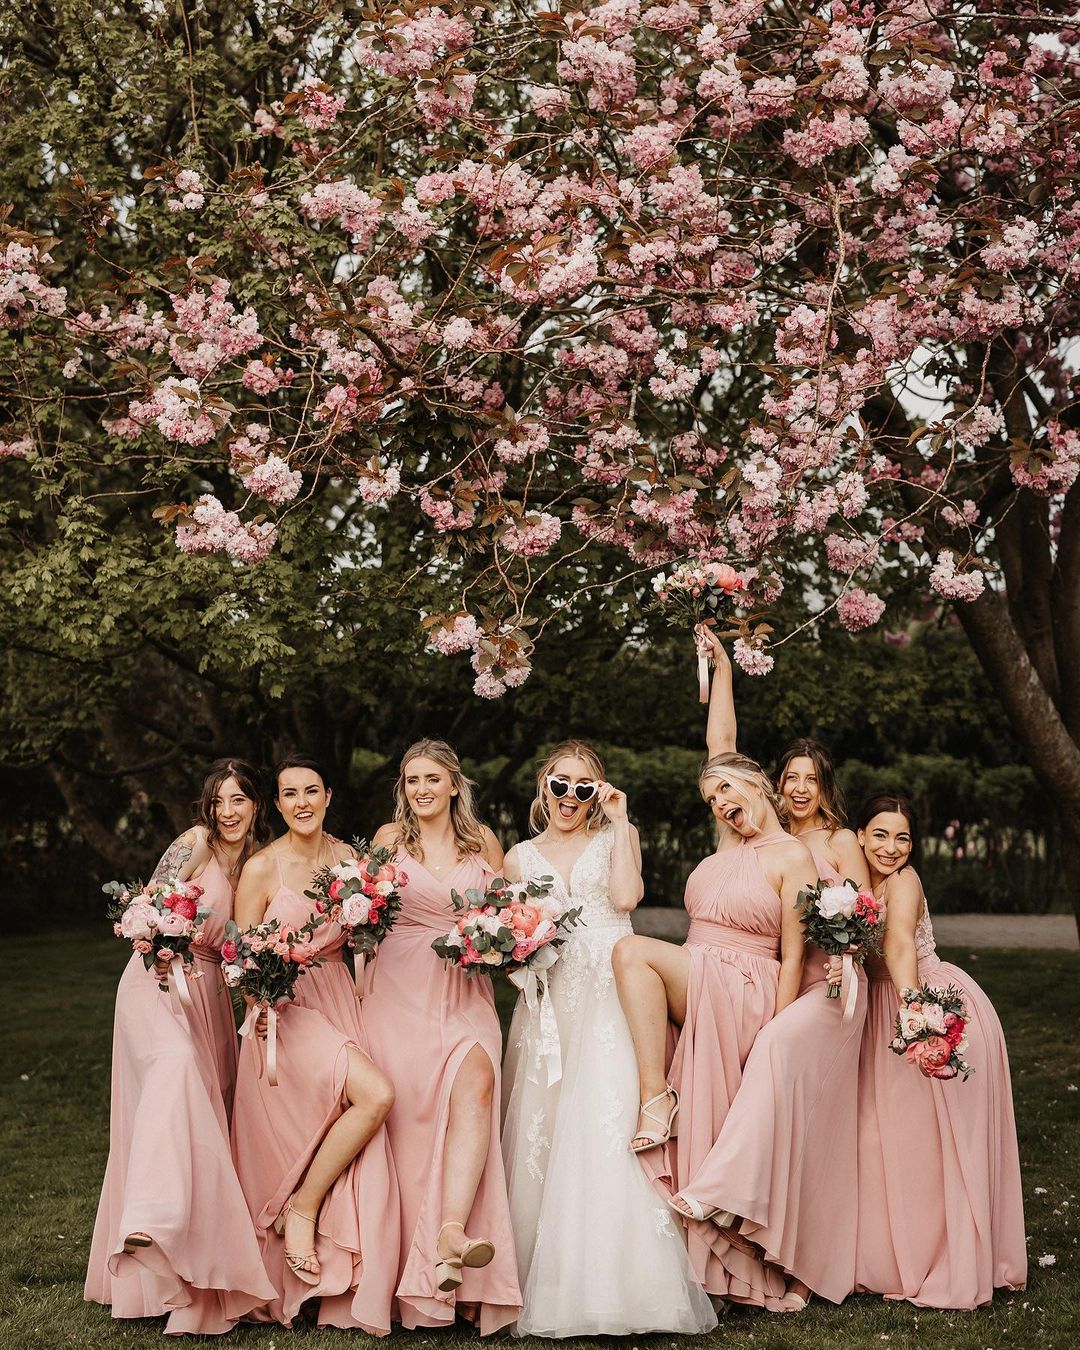 a picture of the bride and her bridesmaid wearing soft pink dress under a flowering tree